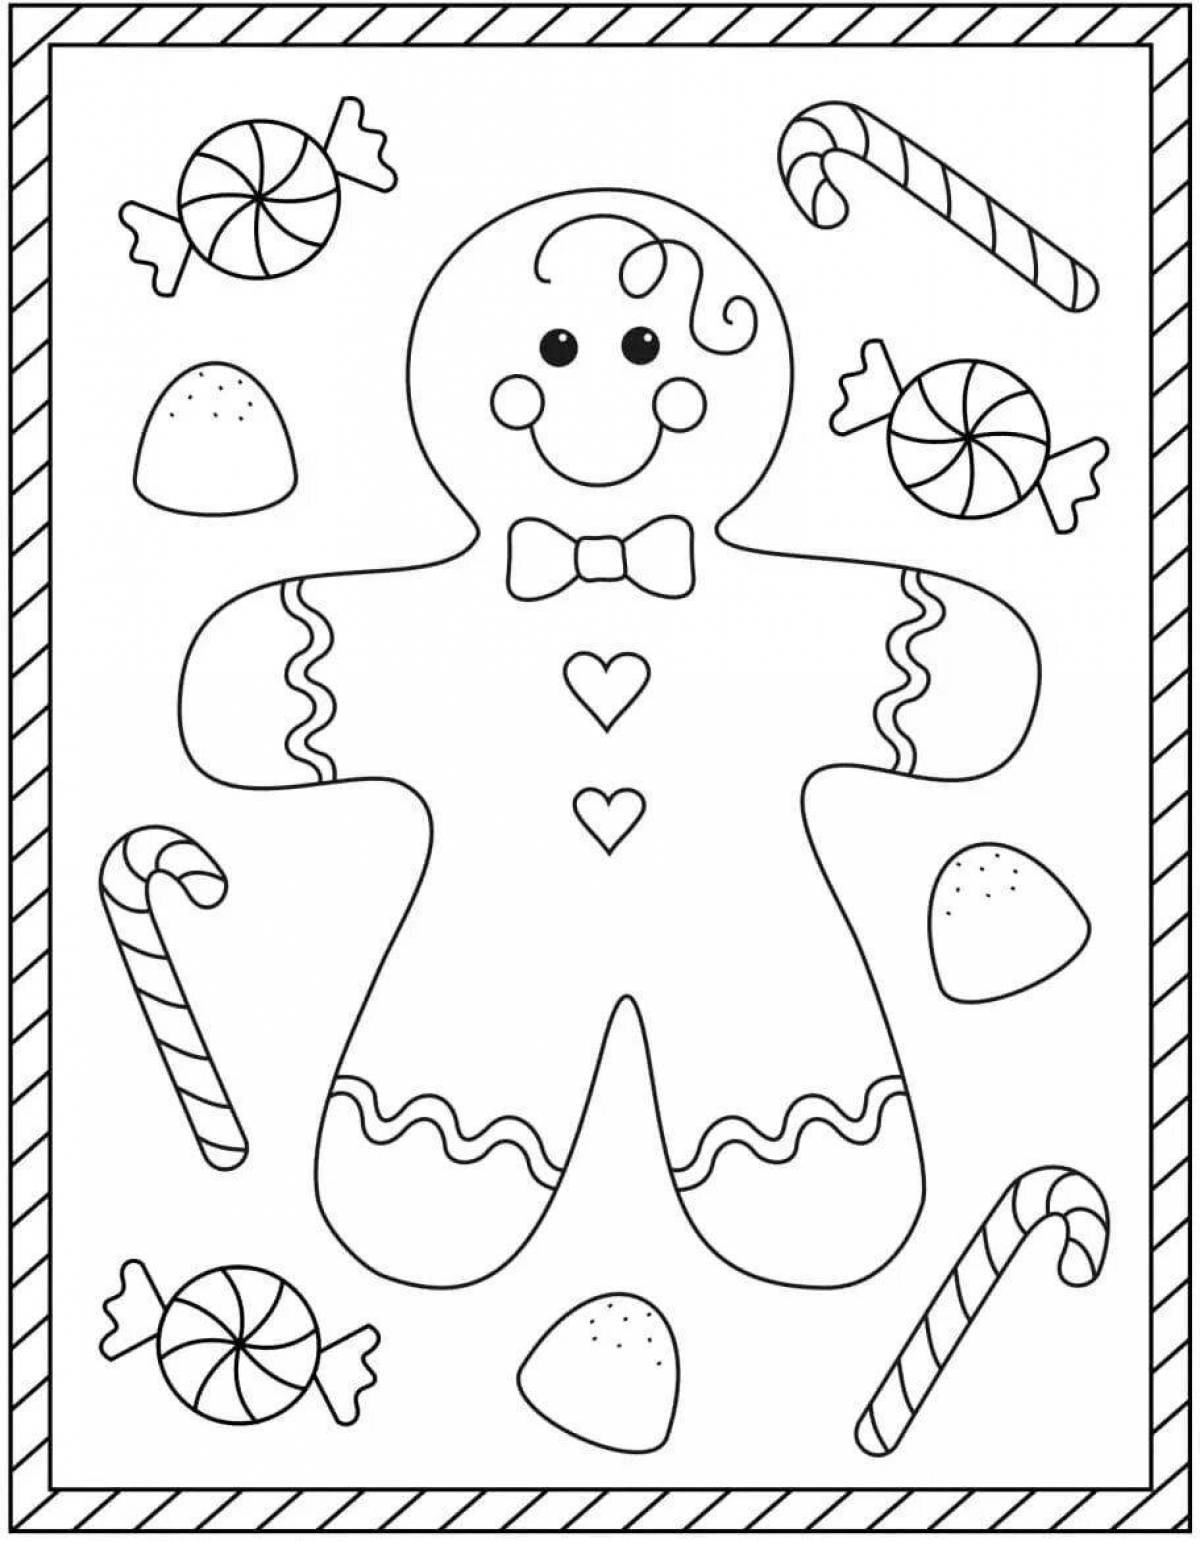 Delightful gingerbread coloring page